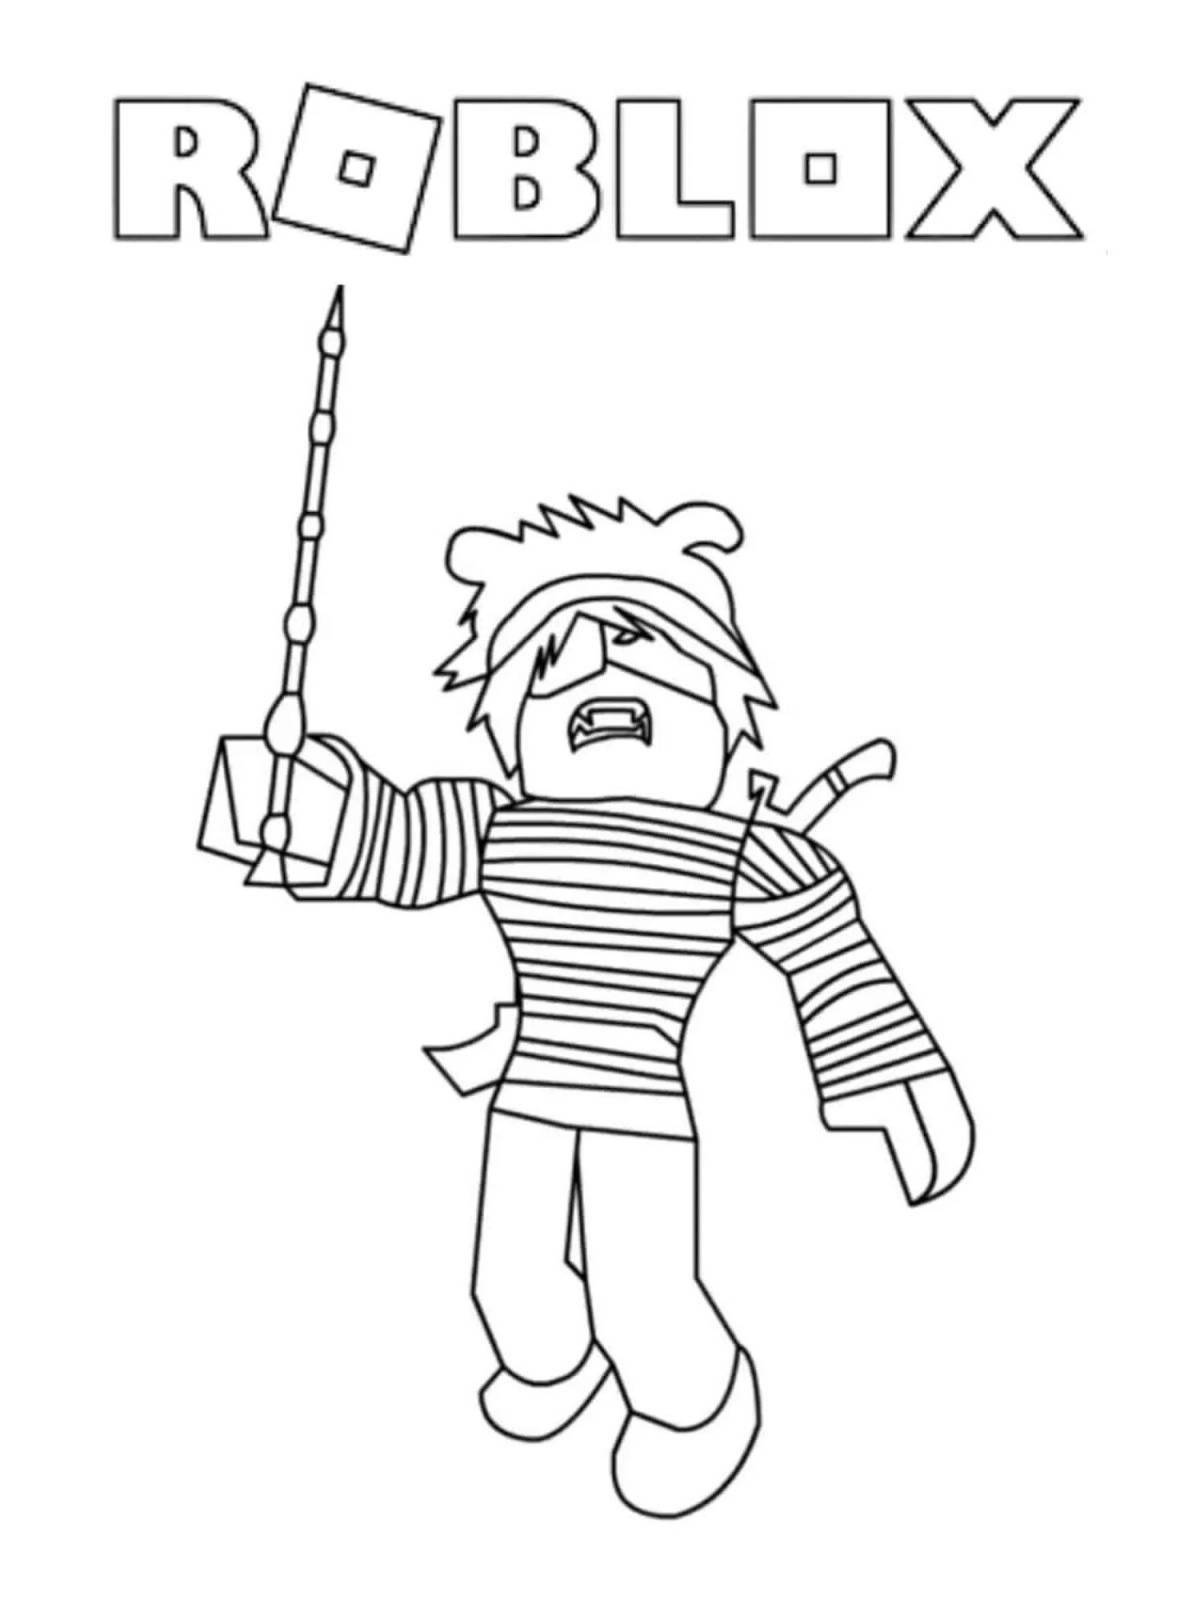 Roblox dors figurines entertaining coloring page